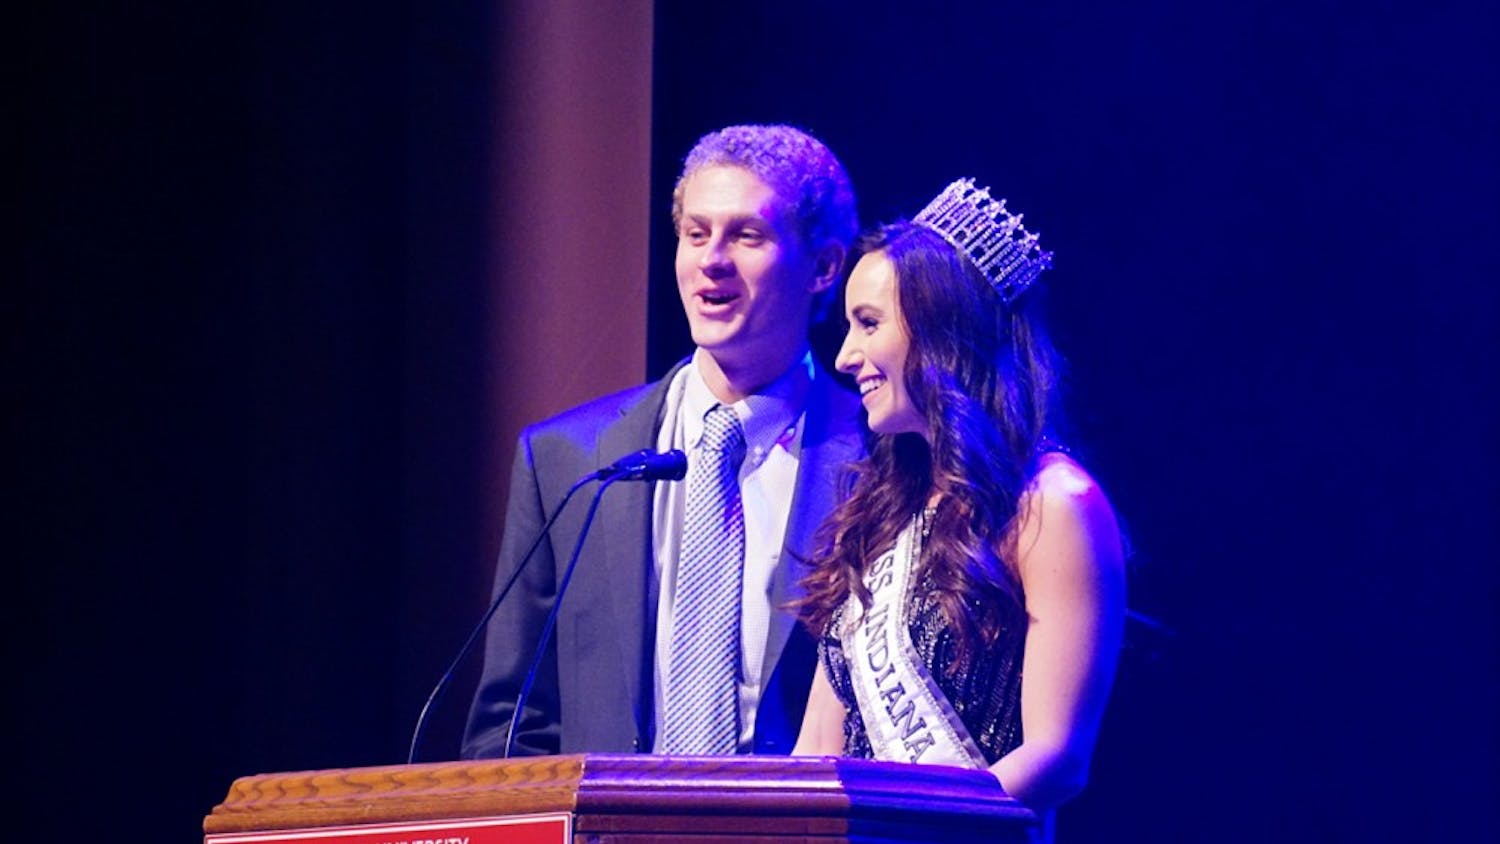 Masters of ceremonies&nbsp;Brittany Winchester&nbsp;and Adam Weber introduce this year's Miss Greek IU contestants. This event took place Sunday night in the IU Auditorium.